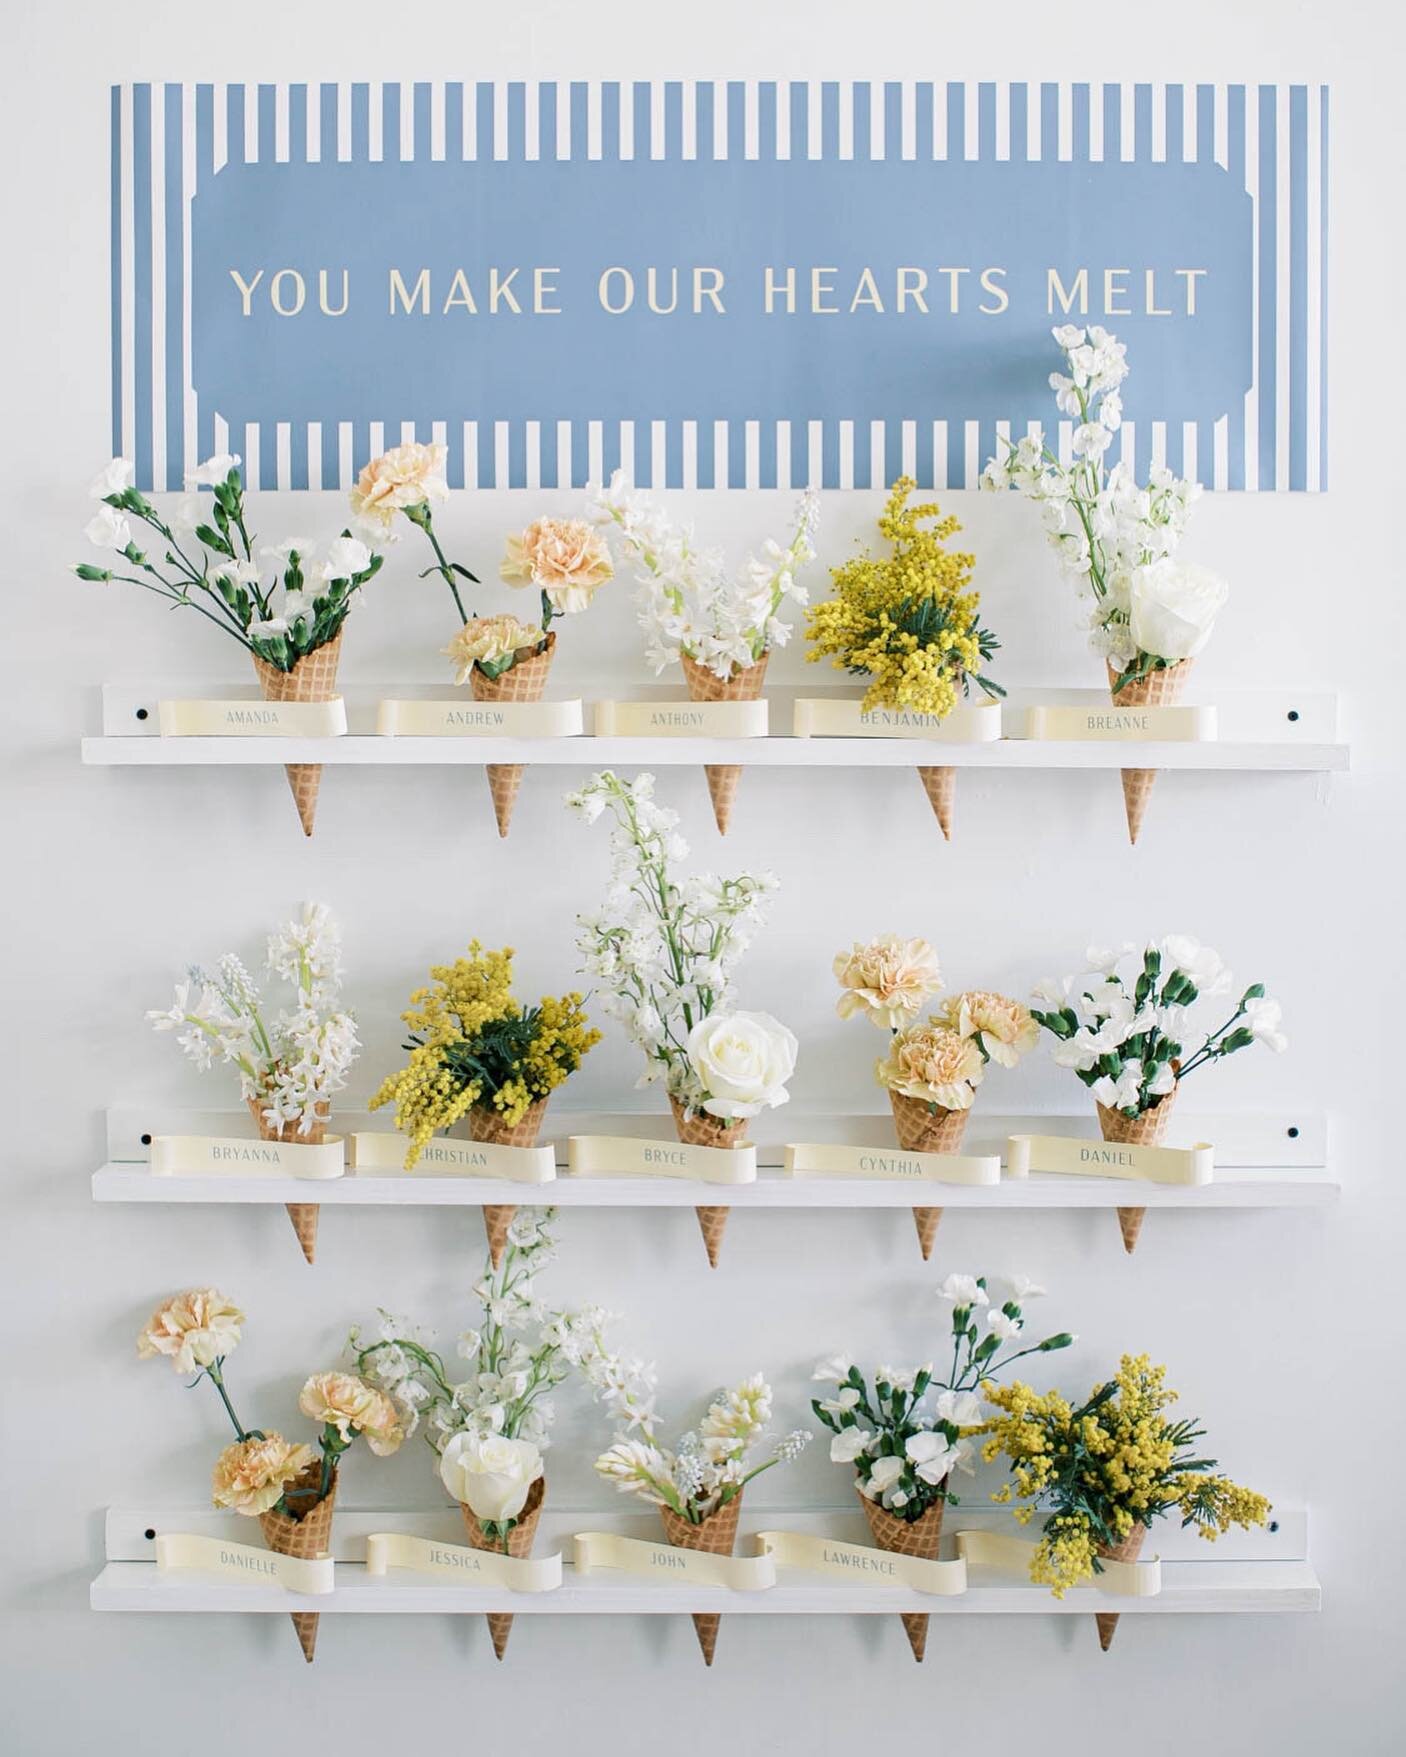 We are screaming over this seating chart inspo from the @merrimonwynne bridal showcase this past weekend - fresh inspo coming at you in 2021! #noboringdetails
⠀⠀⠀⠀⠀⠀⠀⠀⠀
Planning + Event Design: @kasteventsandco 
Photography: @jordanmaunder 
Florals: 